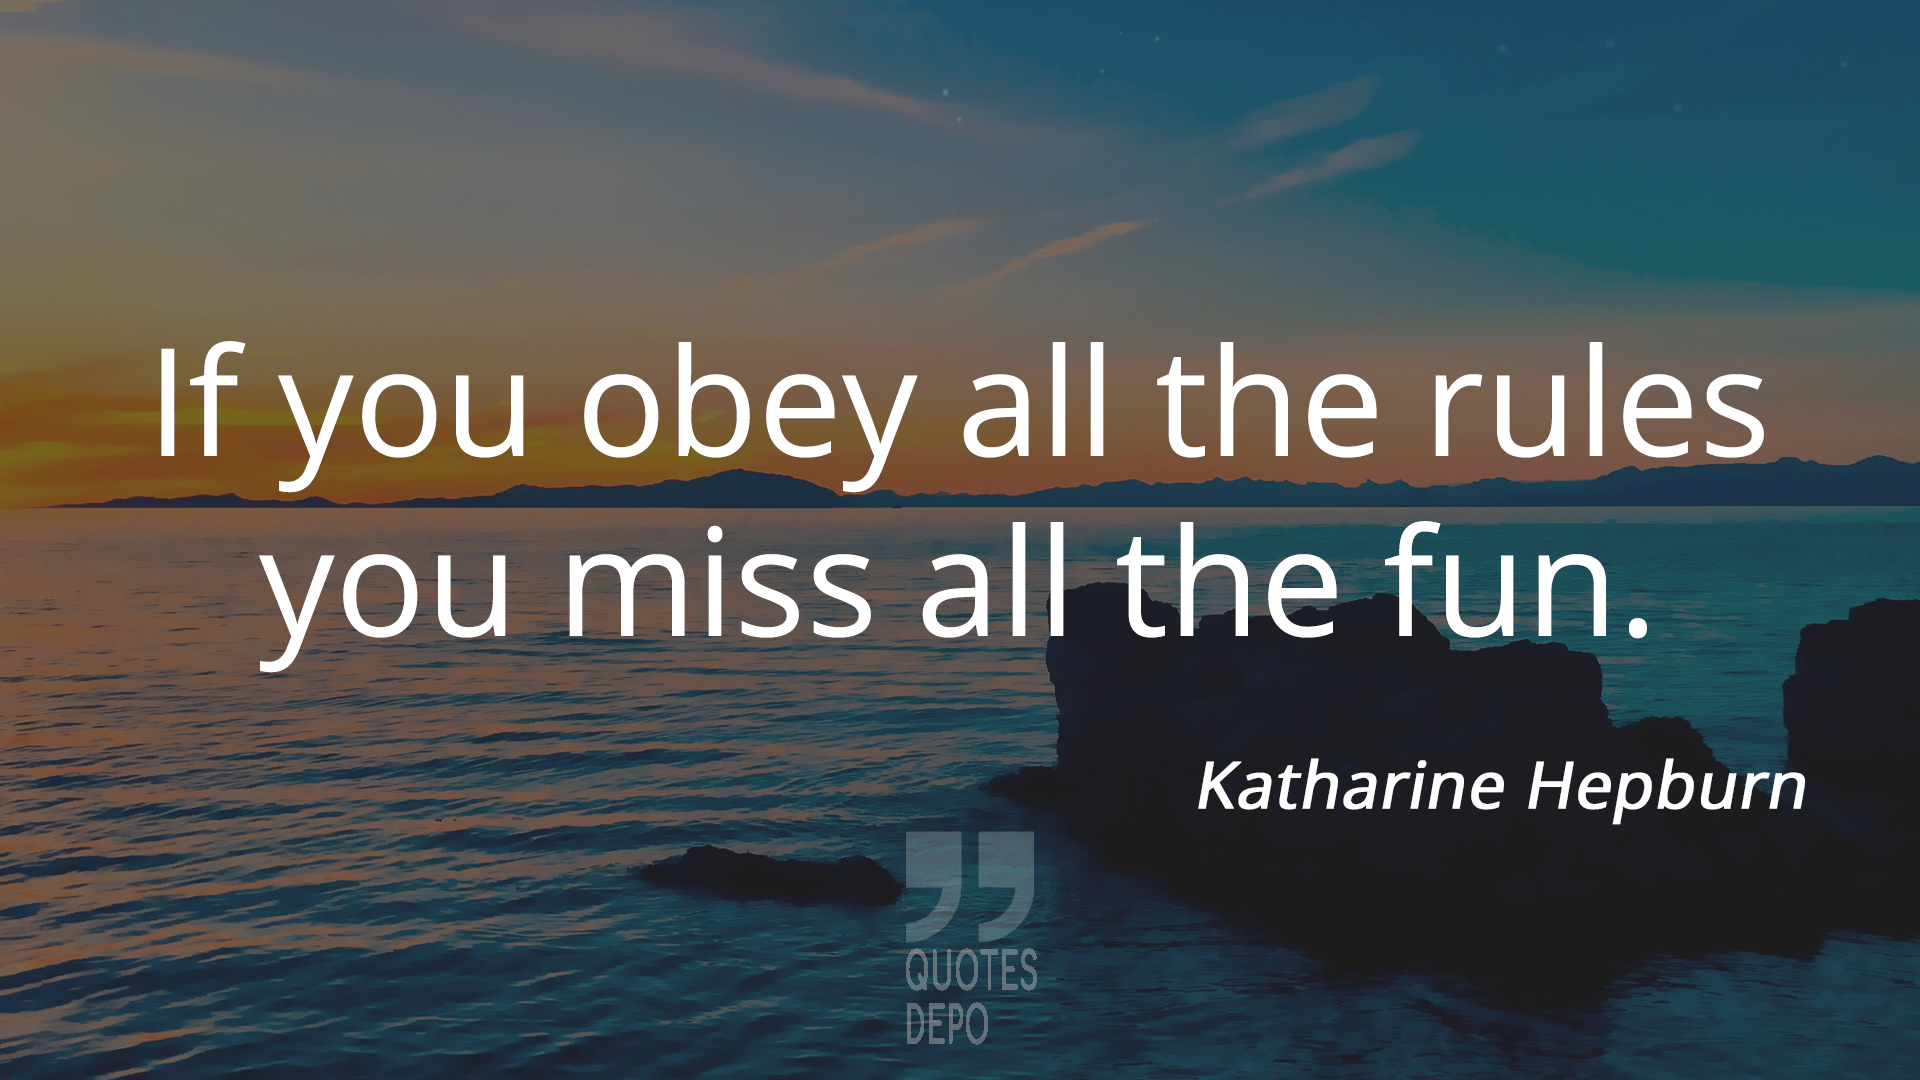 if you obey all the rules you miss all the fun - katharine hepburn quotes